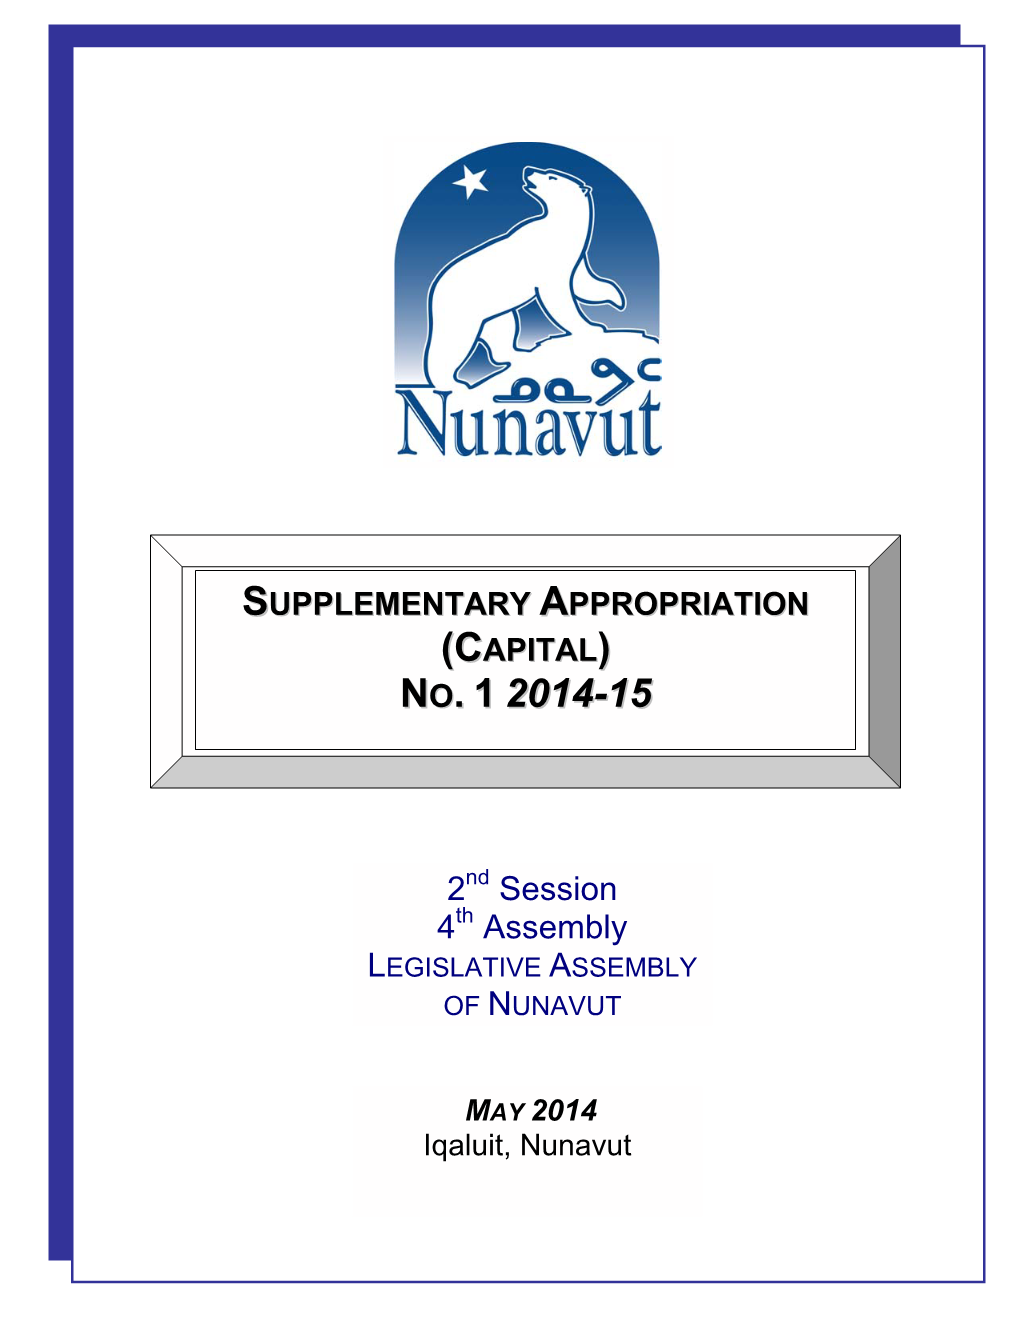 2014-15 Supplementary Appropriation Capital No 1